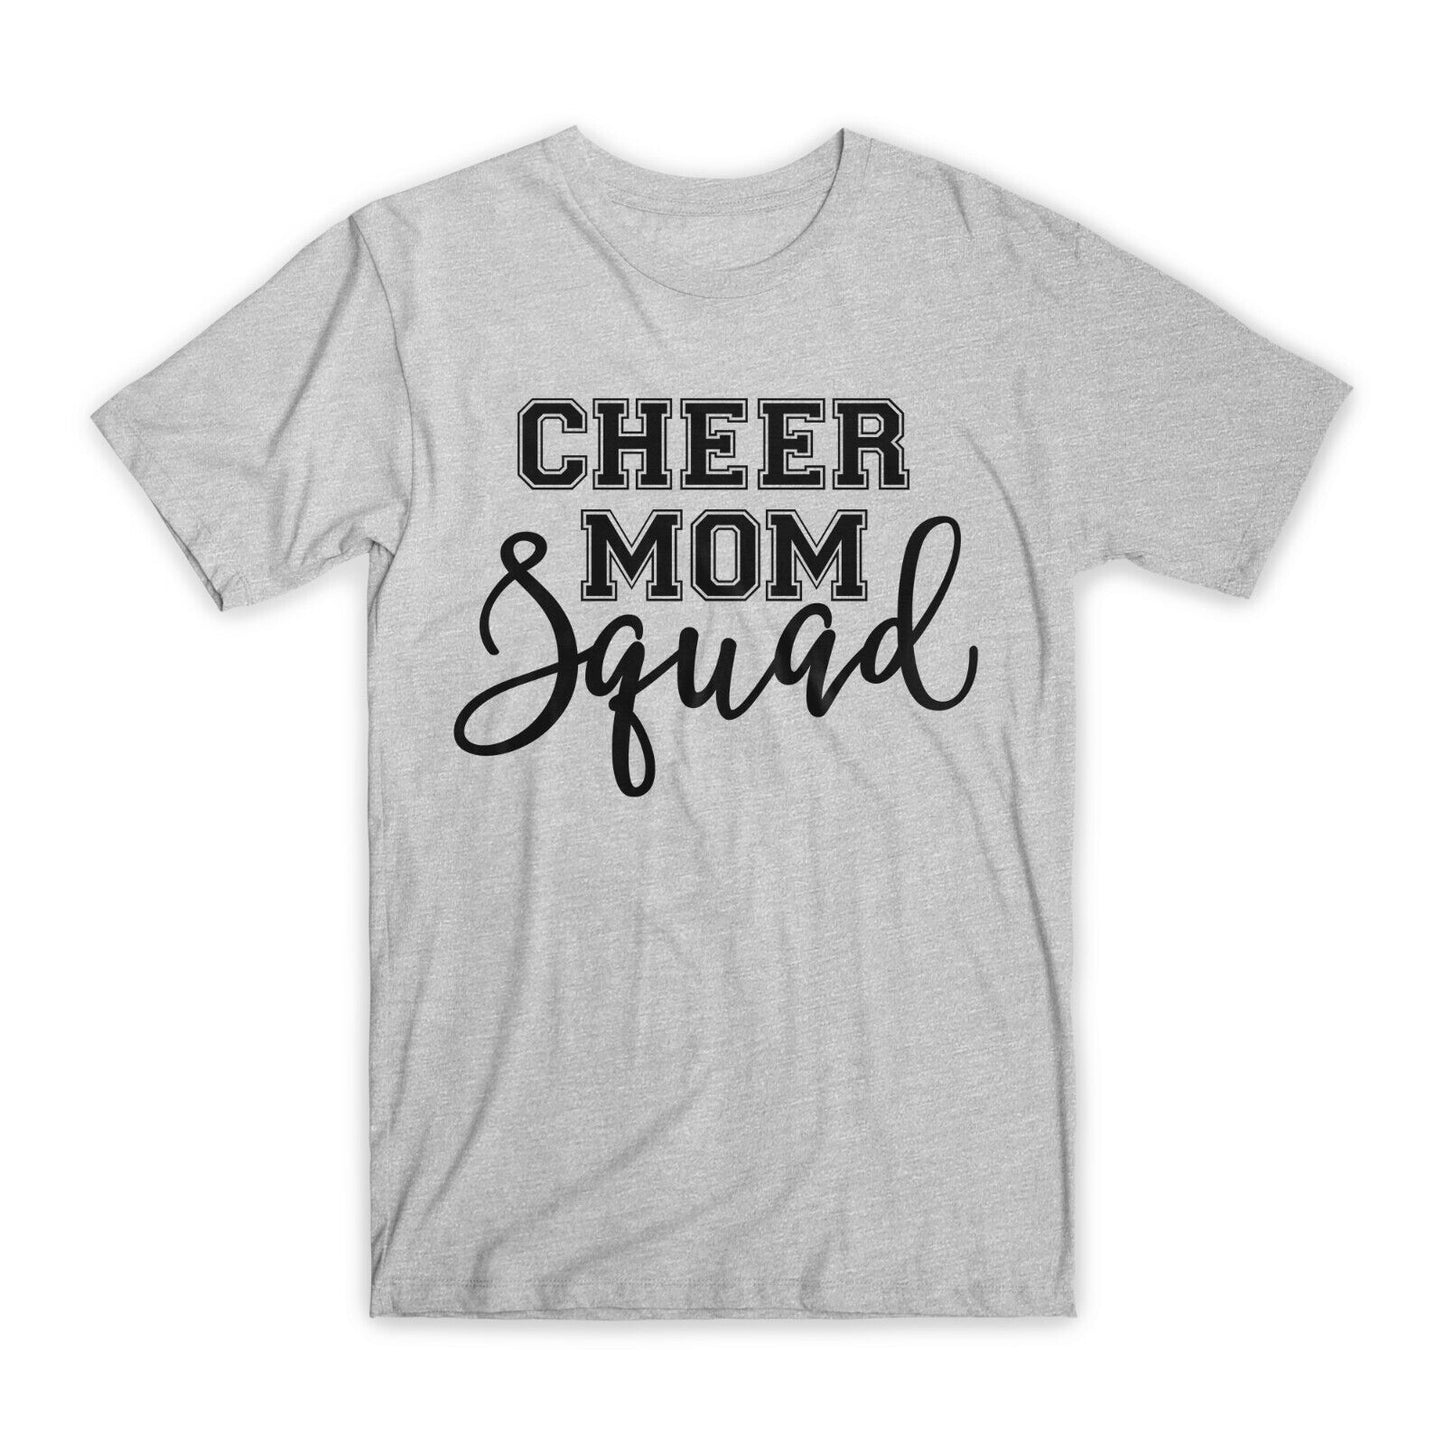 Cheer Mom Squad T-Shirt Premium Soft Cotton Crew Neck Funny Tee Novelty Gift NEW